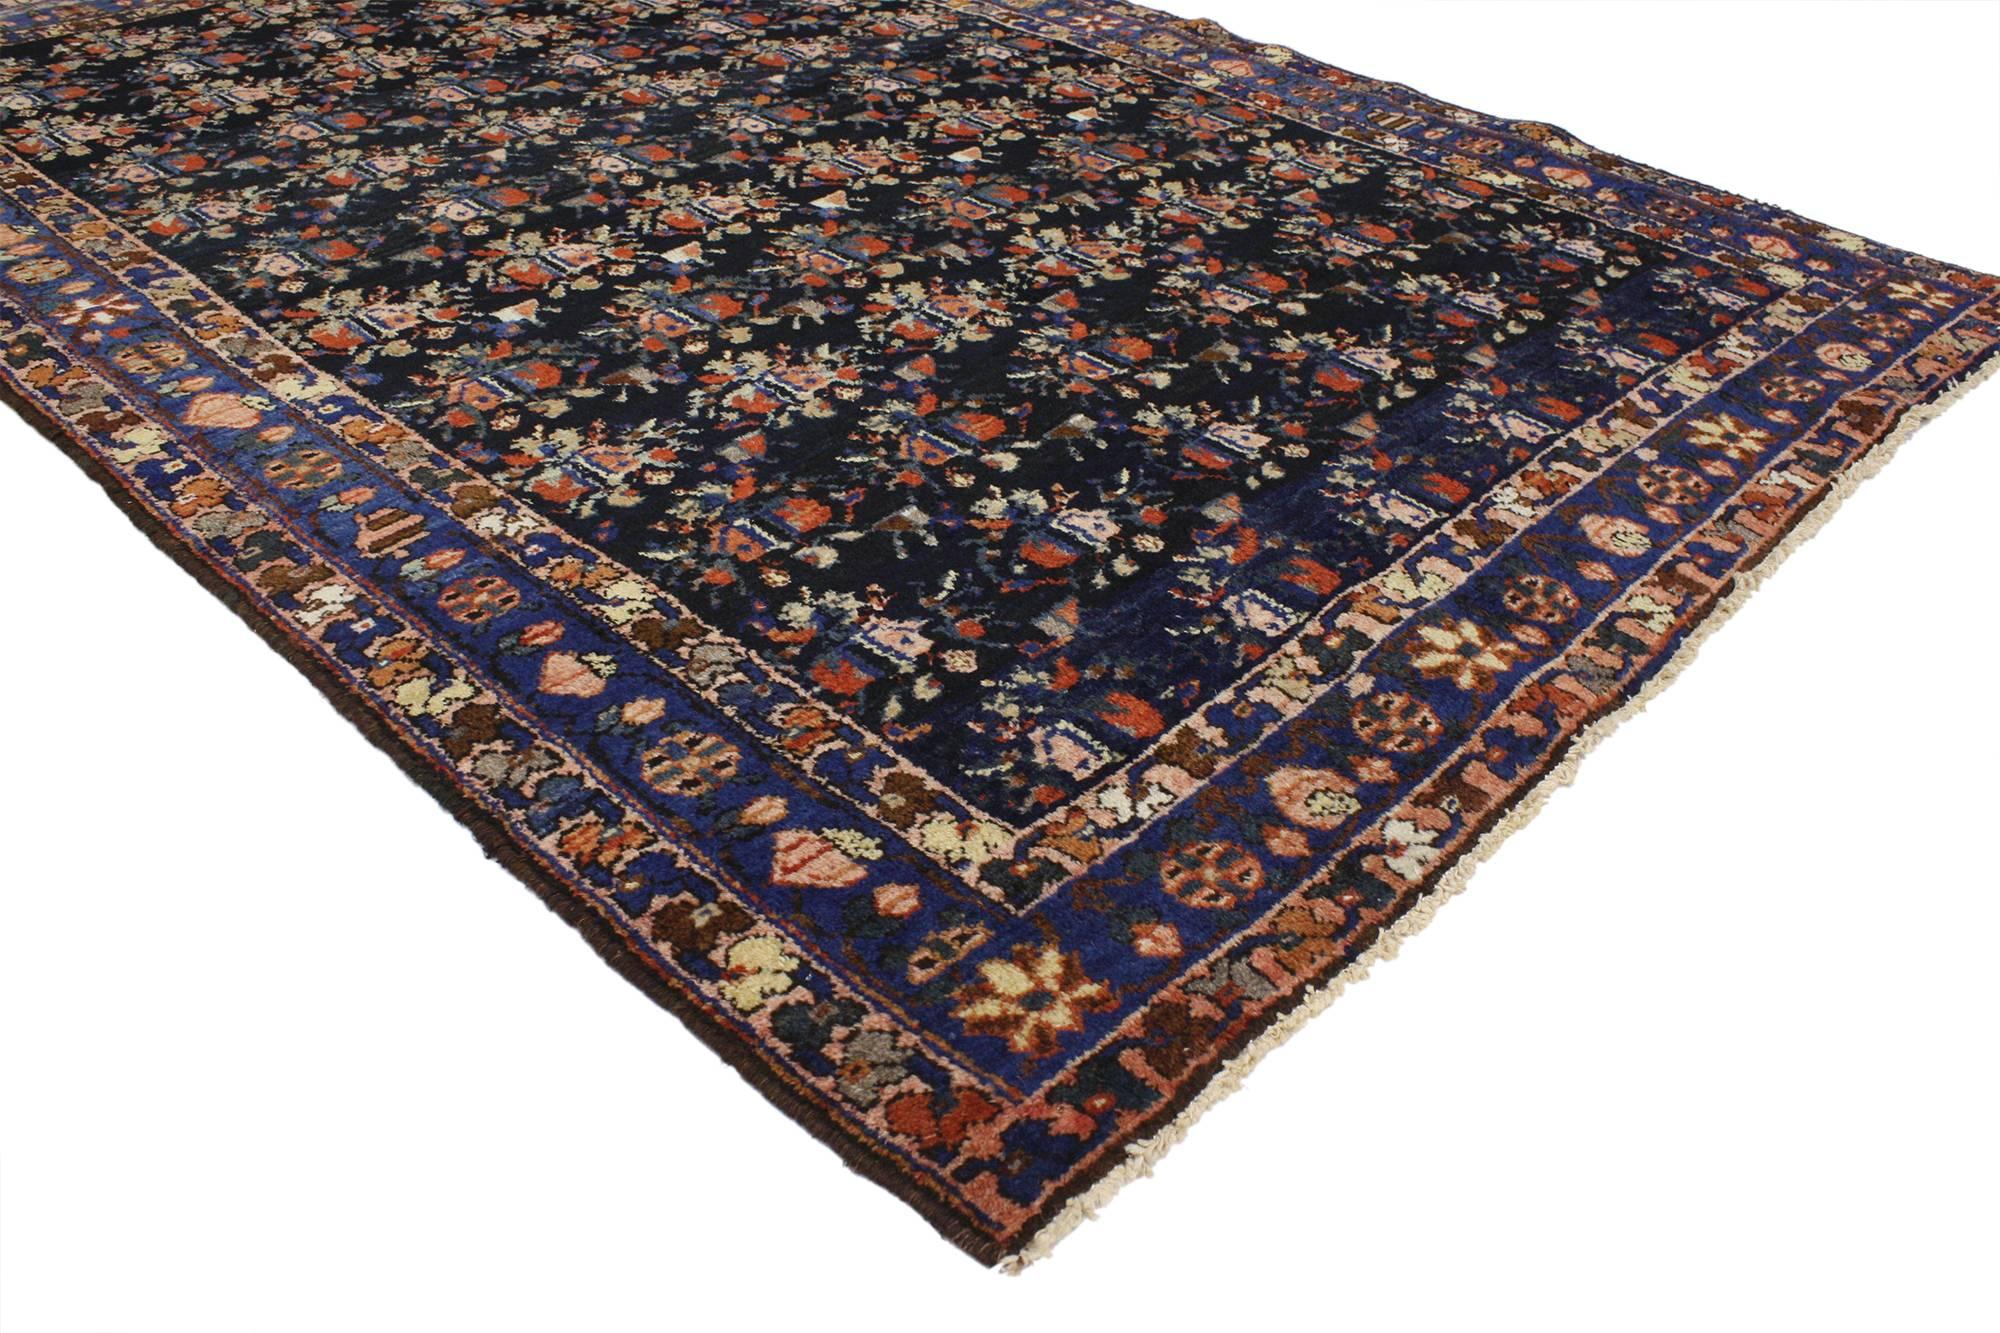 76954, Antique Persian Hamadan Rug with Art Deco Style, Entry or Foyer Rug. Bright floral bunches on a dark field create the allover stylized floral pattern of this hand-knotted wool antique Persian Hamadan accent rug. Three decorative guard borders